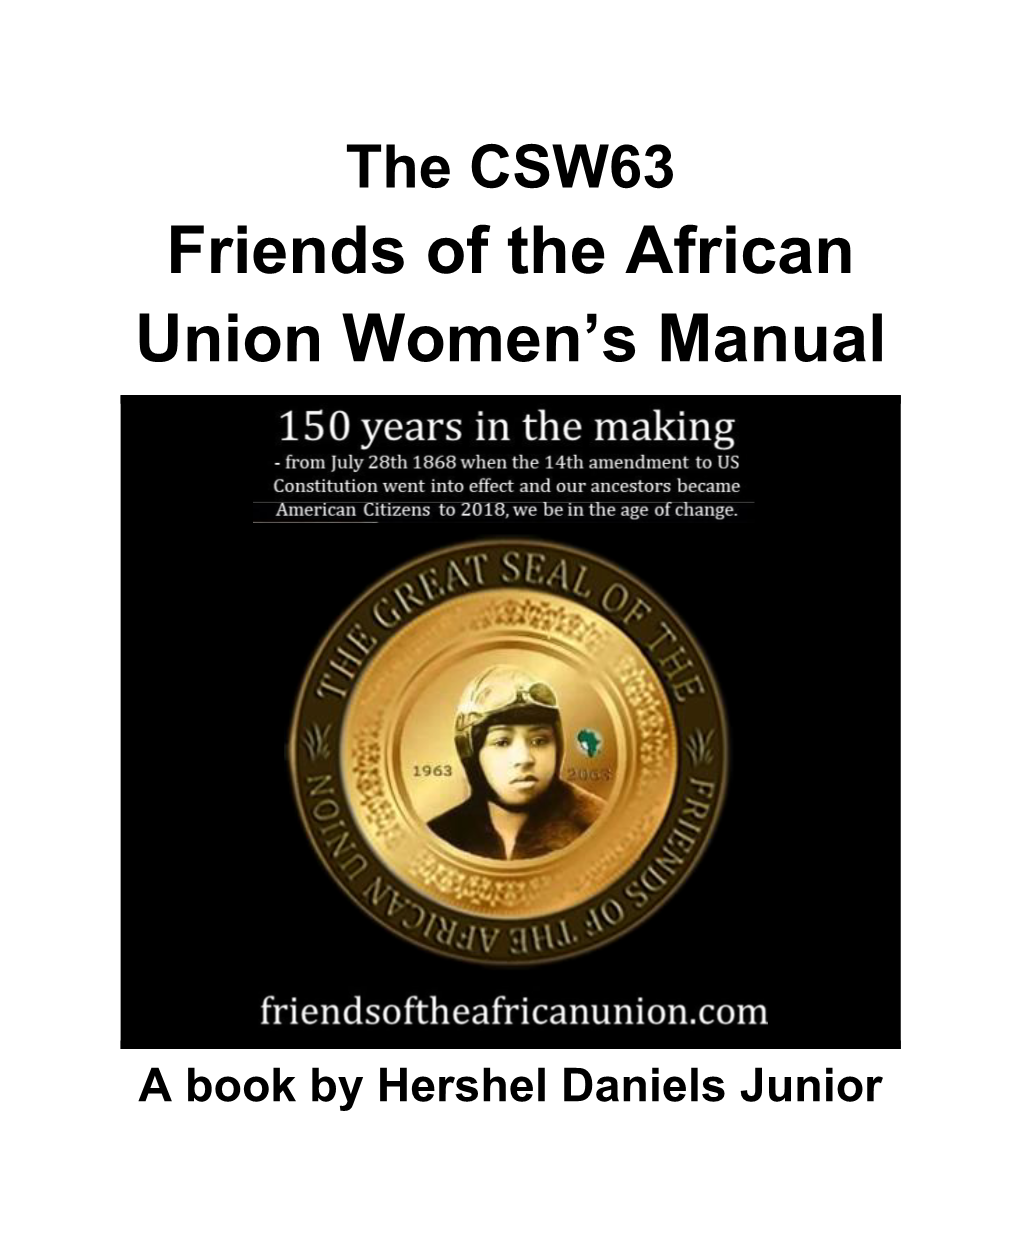 Friends of the African Union Women's Manual